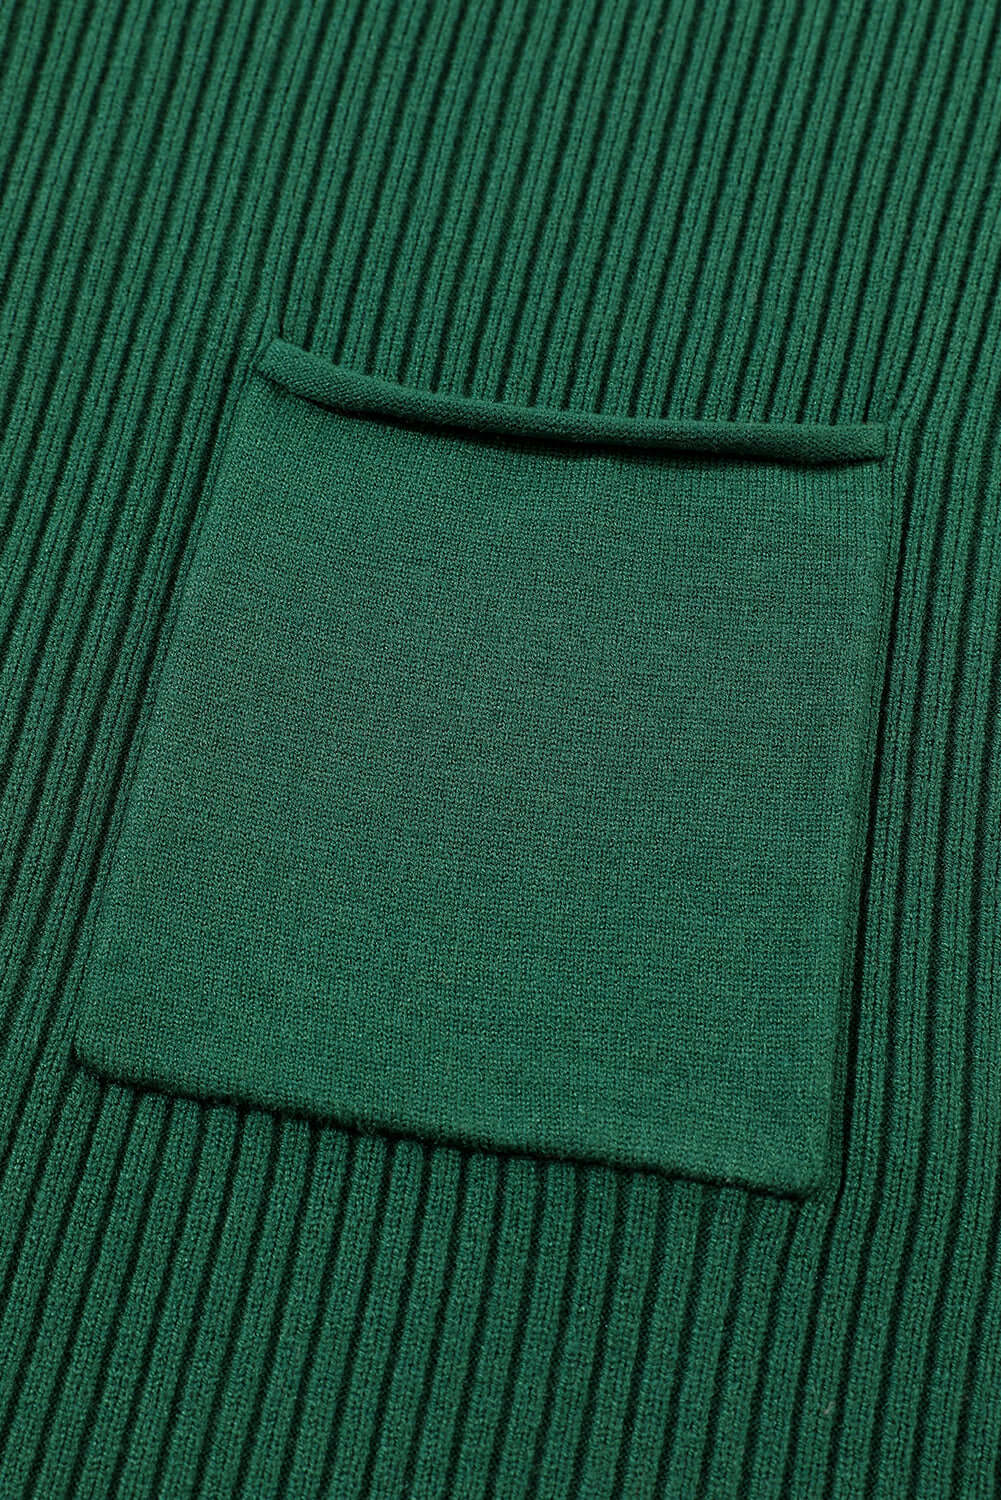 Blackish Green Patch Pocket Ribbed Knit Short Sleeve Sweater - Dixie Hike & Style